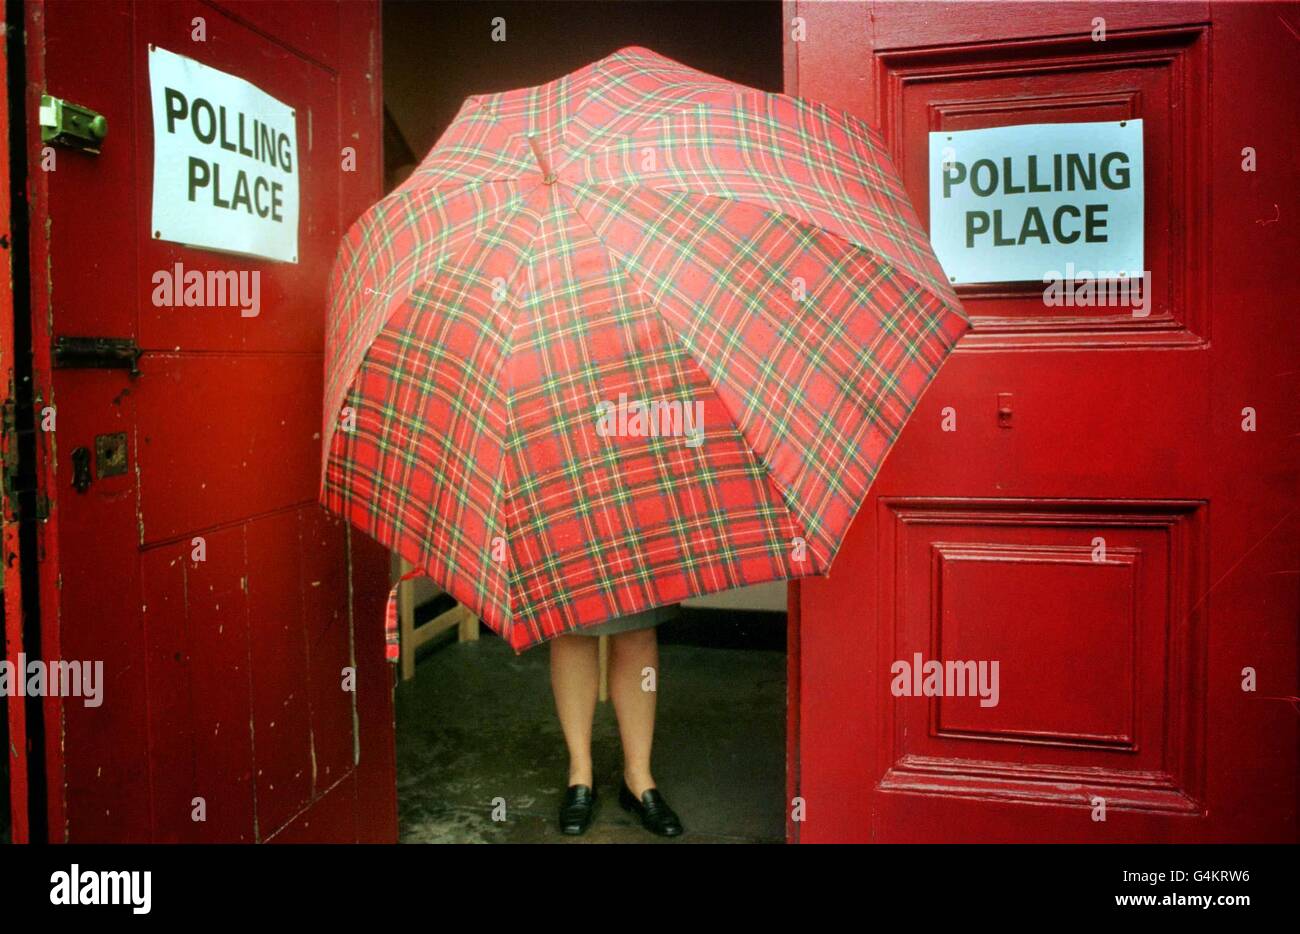 A voter braves the weather at a polling station at St Stephen's church in Edinburgh, to select the first Scottish Parliament for 300 years. Elsewhere in the United Kingdom, voters in Wales were choosing members of a new Welsh assembley. Stock Photo